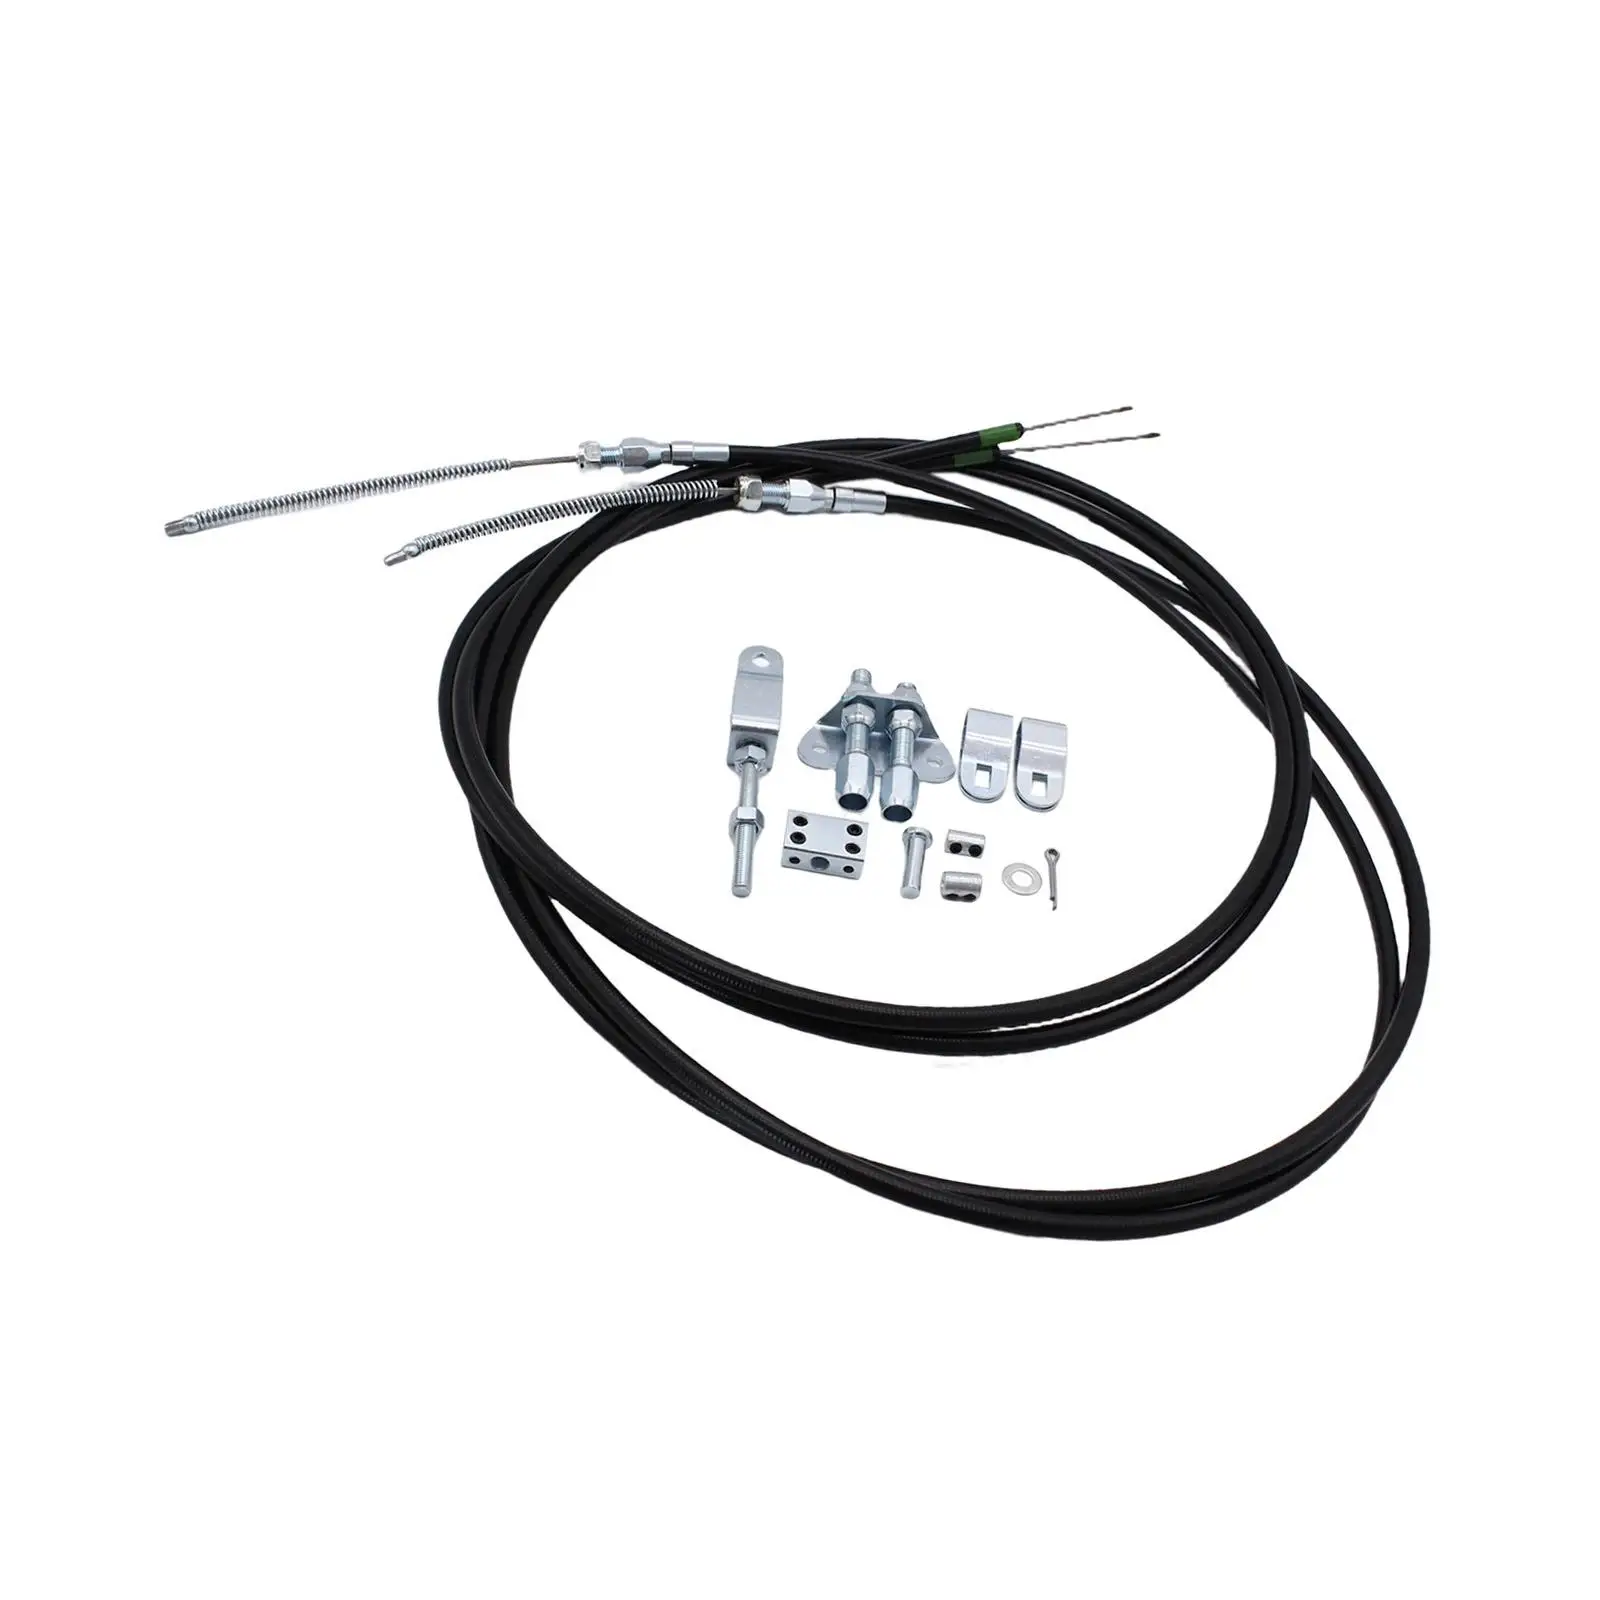 Car Universal Parking Brake Cable Kit 330-9371 Replaces for Disc or Drum Brakes